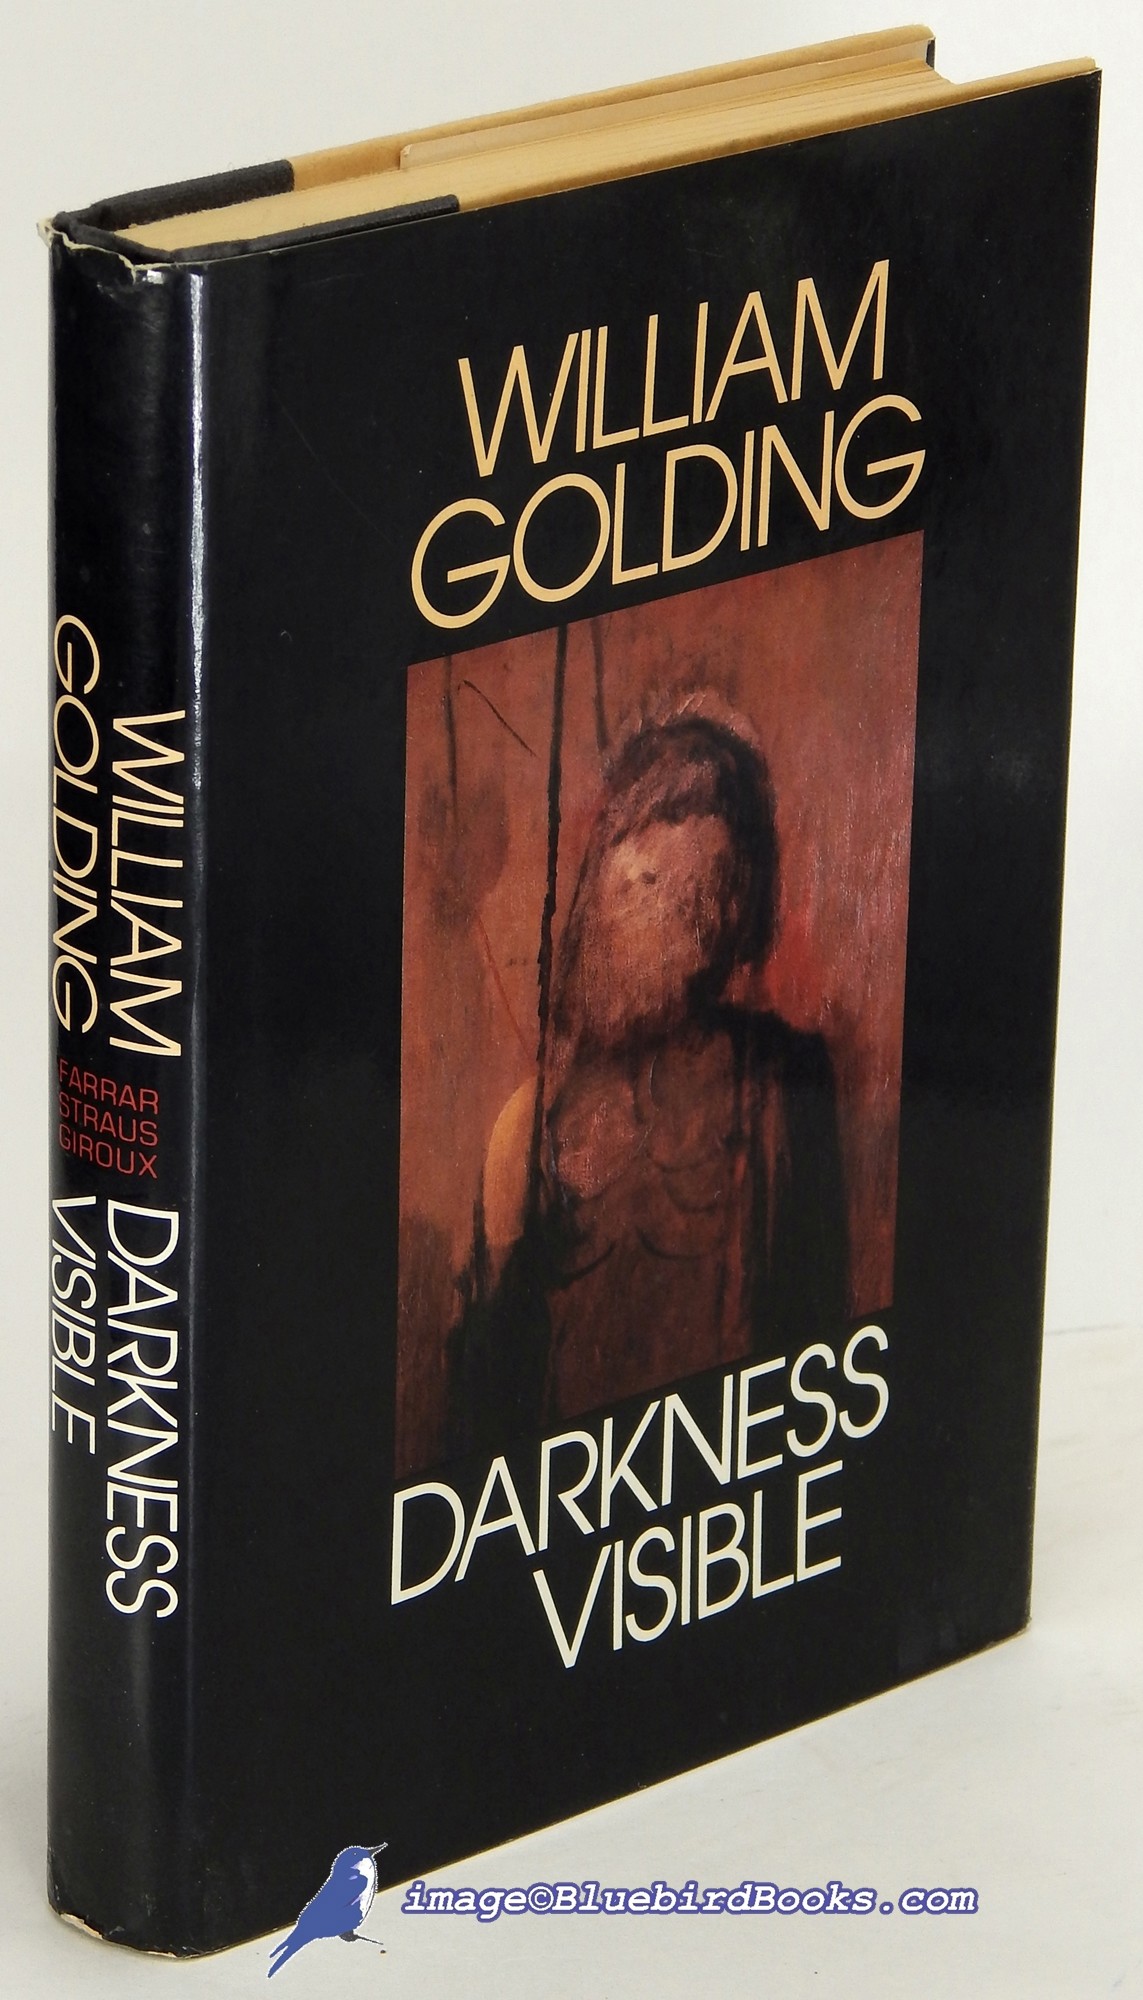 GOLDING, WILLIAM - Darkness Visible